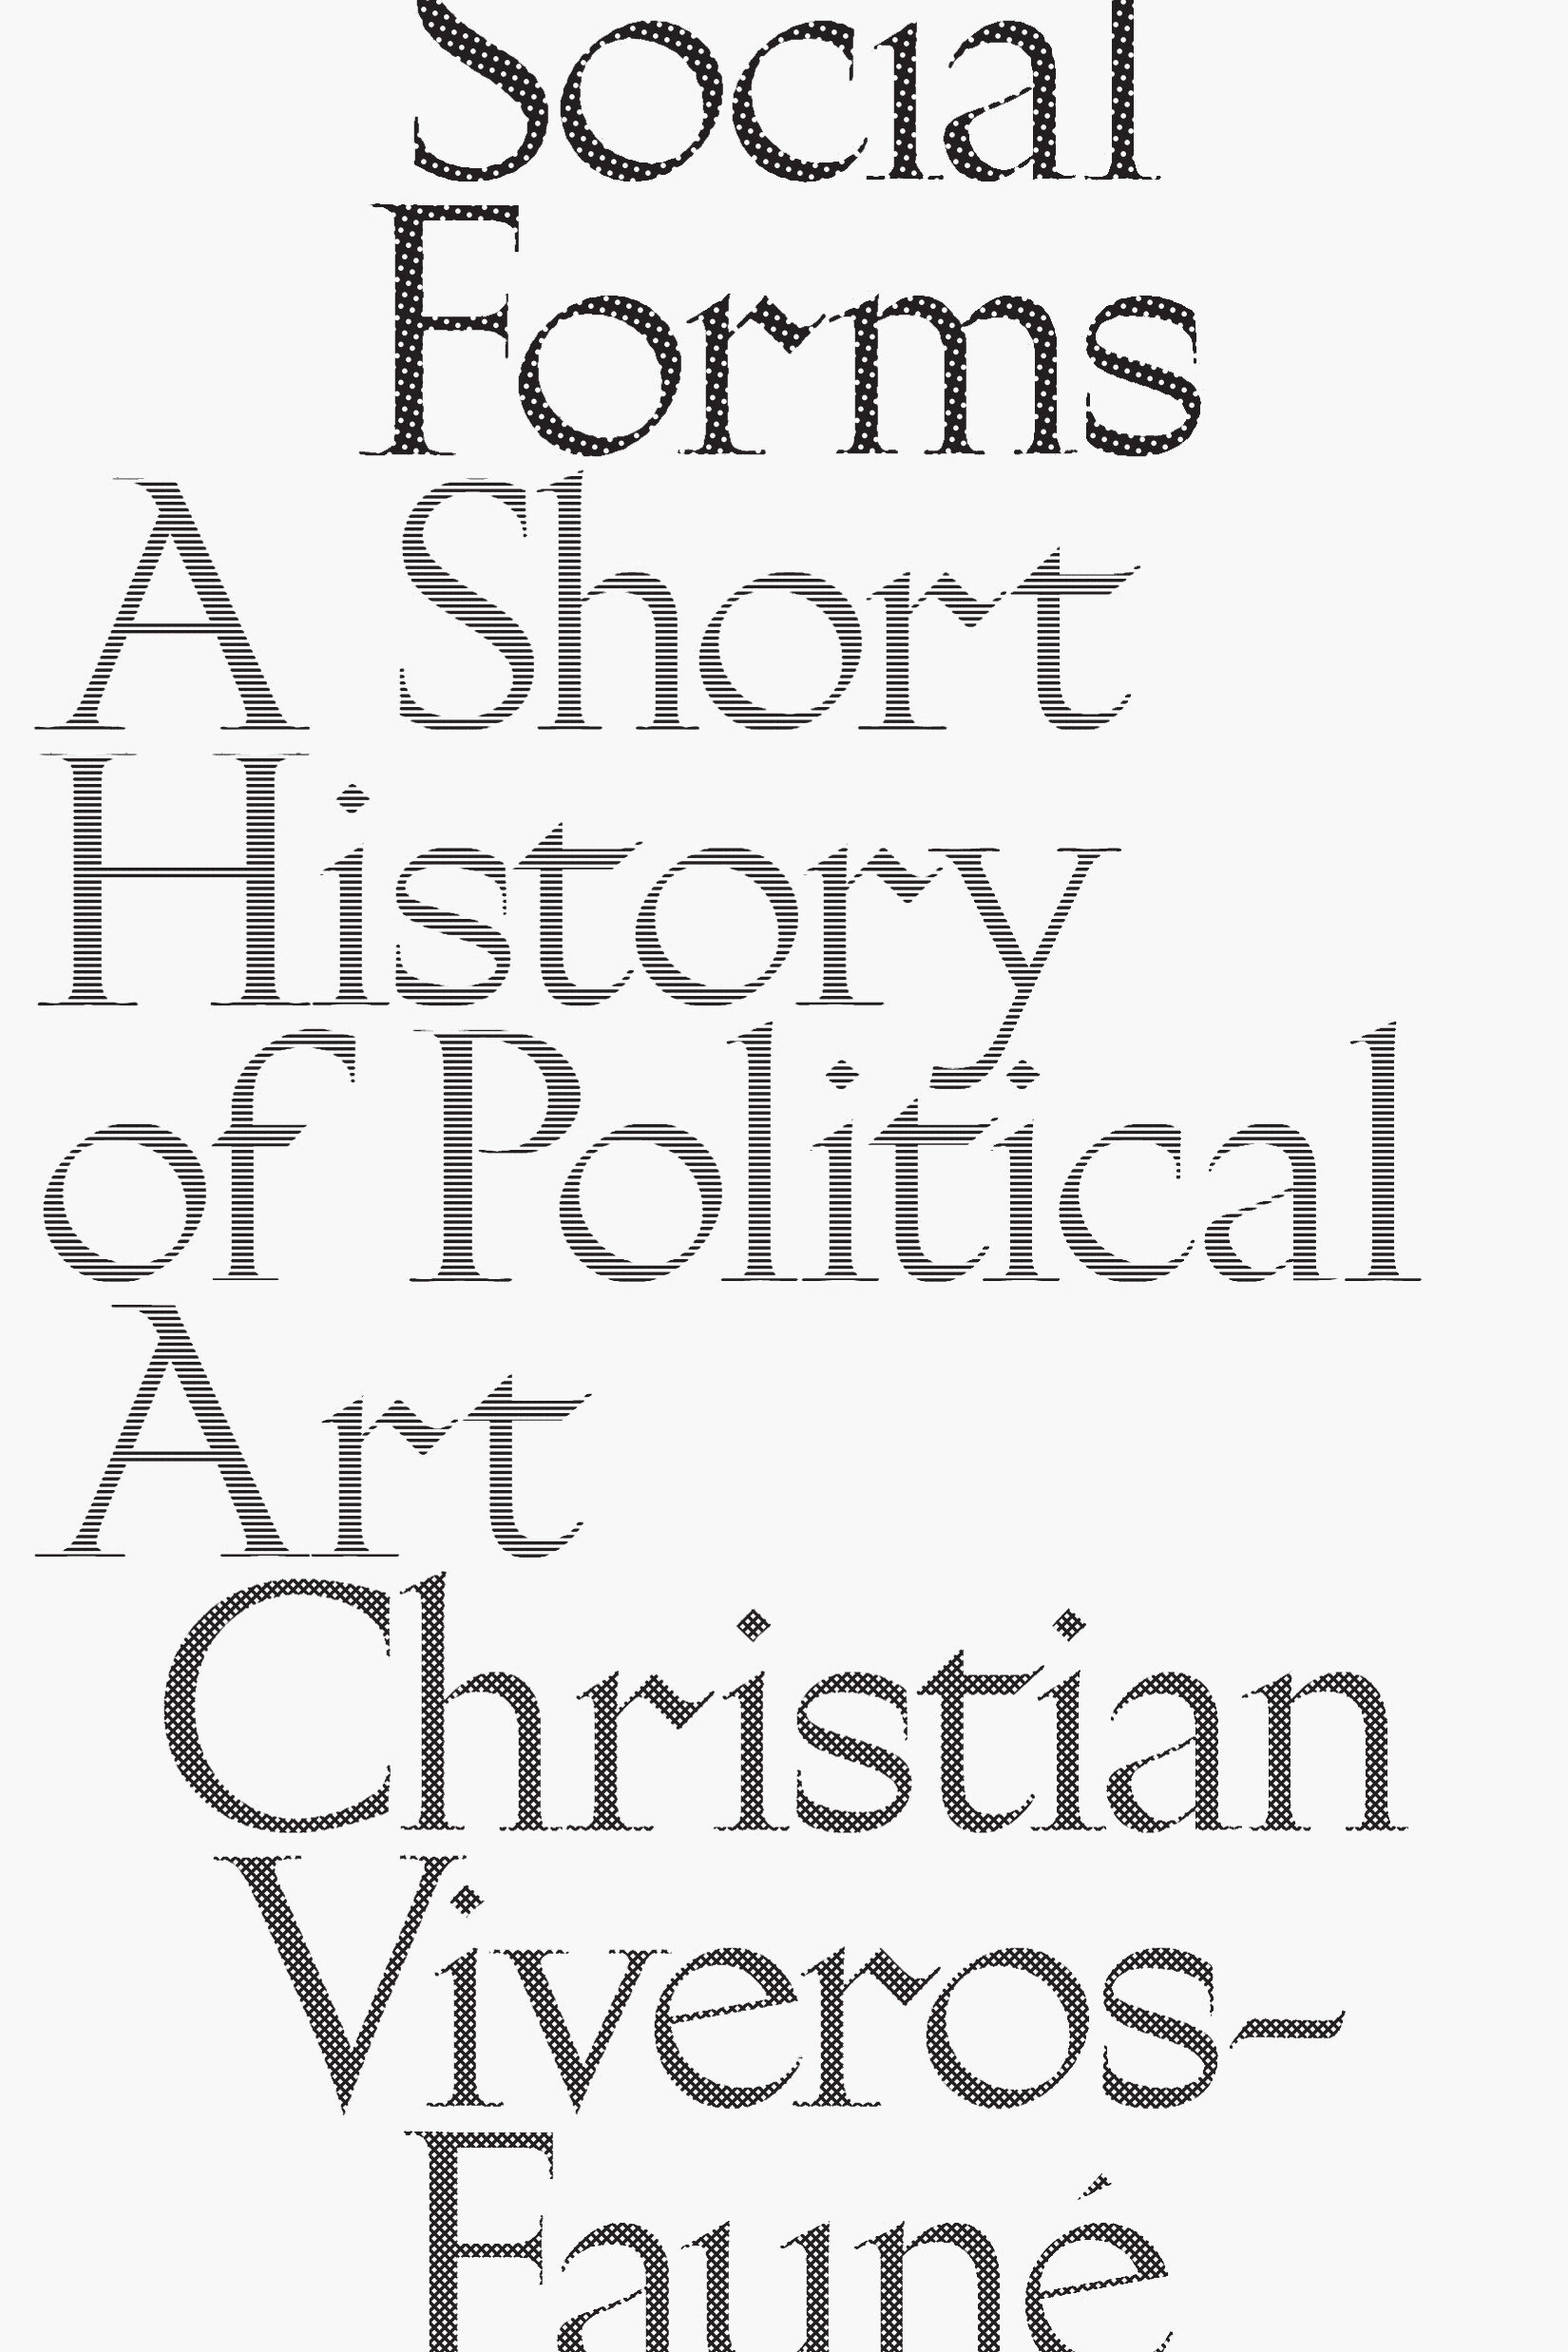 Cover of a book titled Social Forms: A Short History of Political Art by Christian Viveros-Fauné, published by David Zwirner Books in 2018.